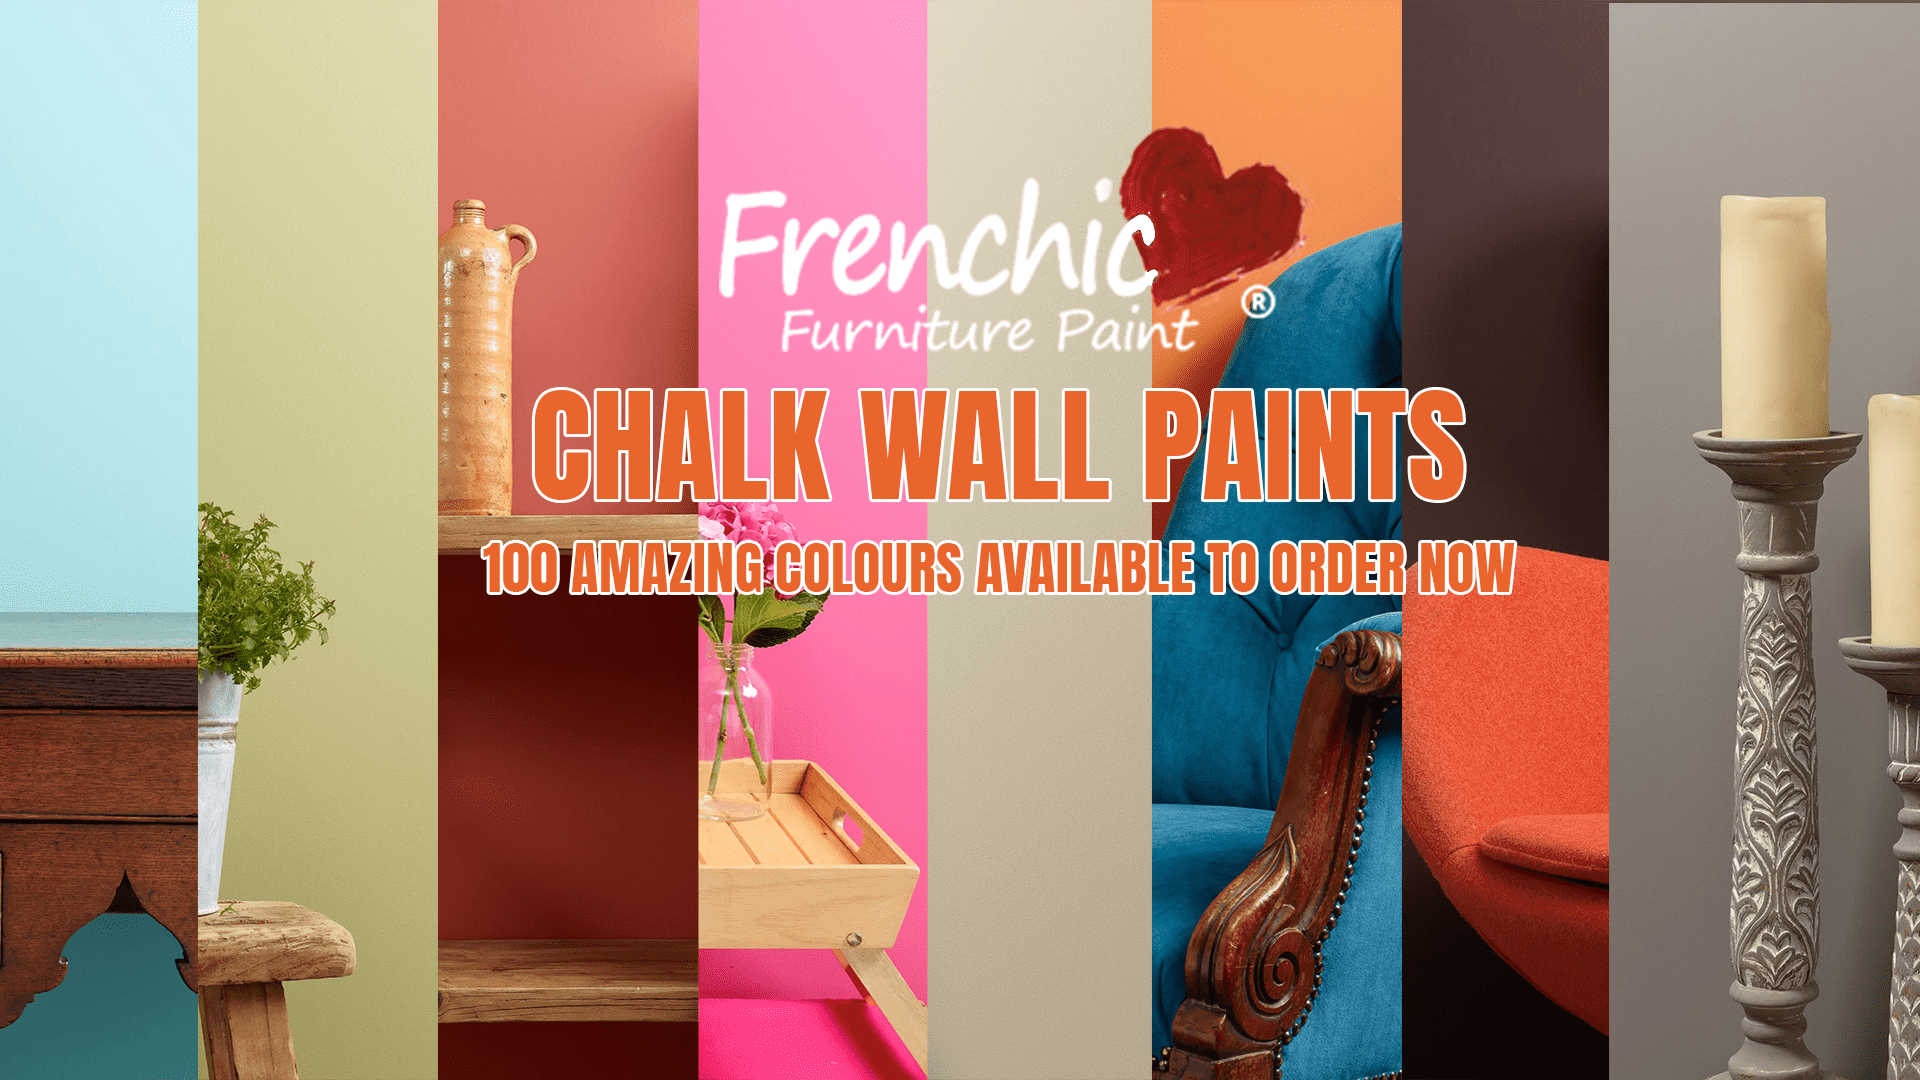 Frenchic Chalk Wall Paint is luxurious, practical and totally scrubbable. Ultra-matte and velvet.